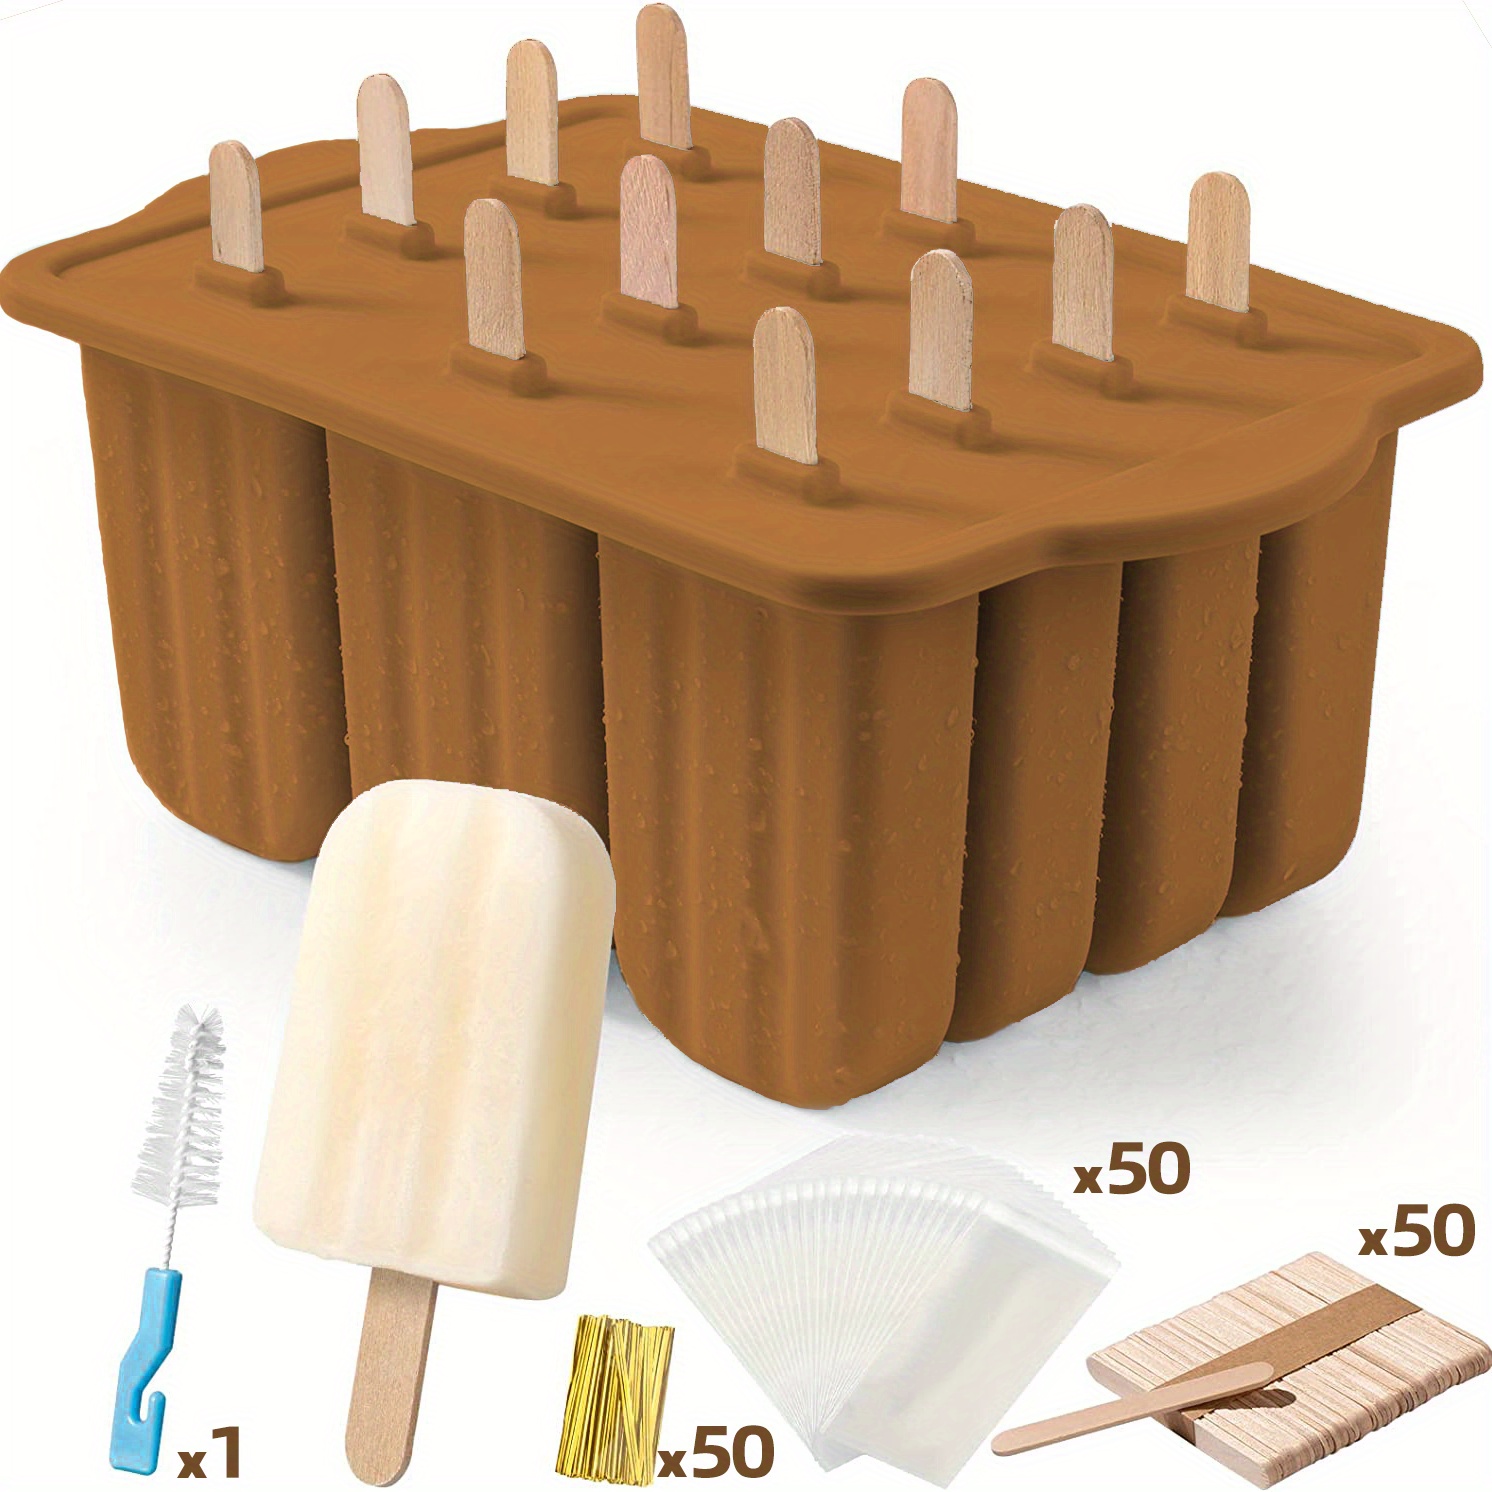 12 PCS Silicone Popsicle Molds Easy-release Bpa-free Popsicle Maker Molds  Ice Pop Molds Homemade Popsicle Ice Pop Maker With 50PCS Sticks 